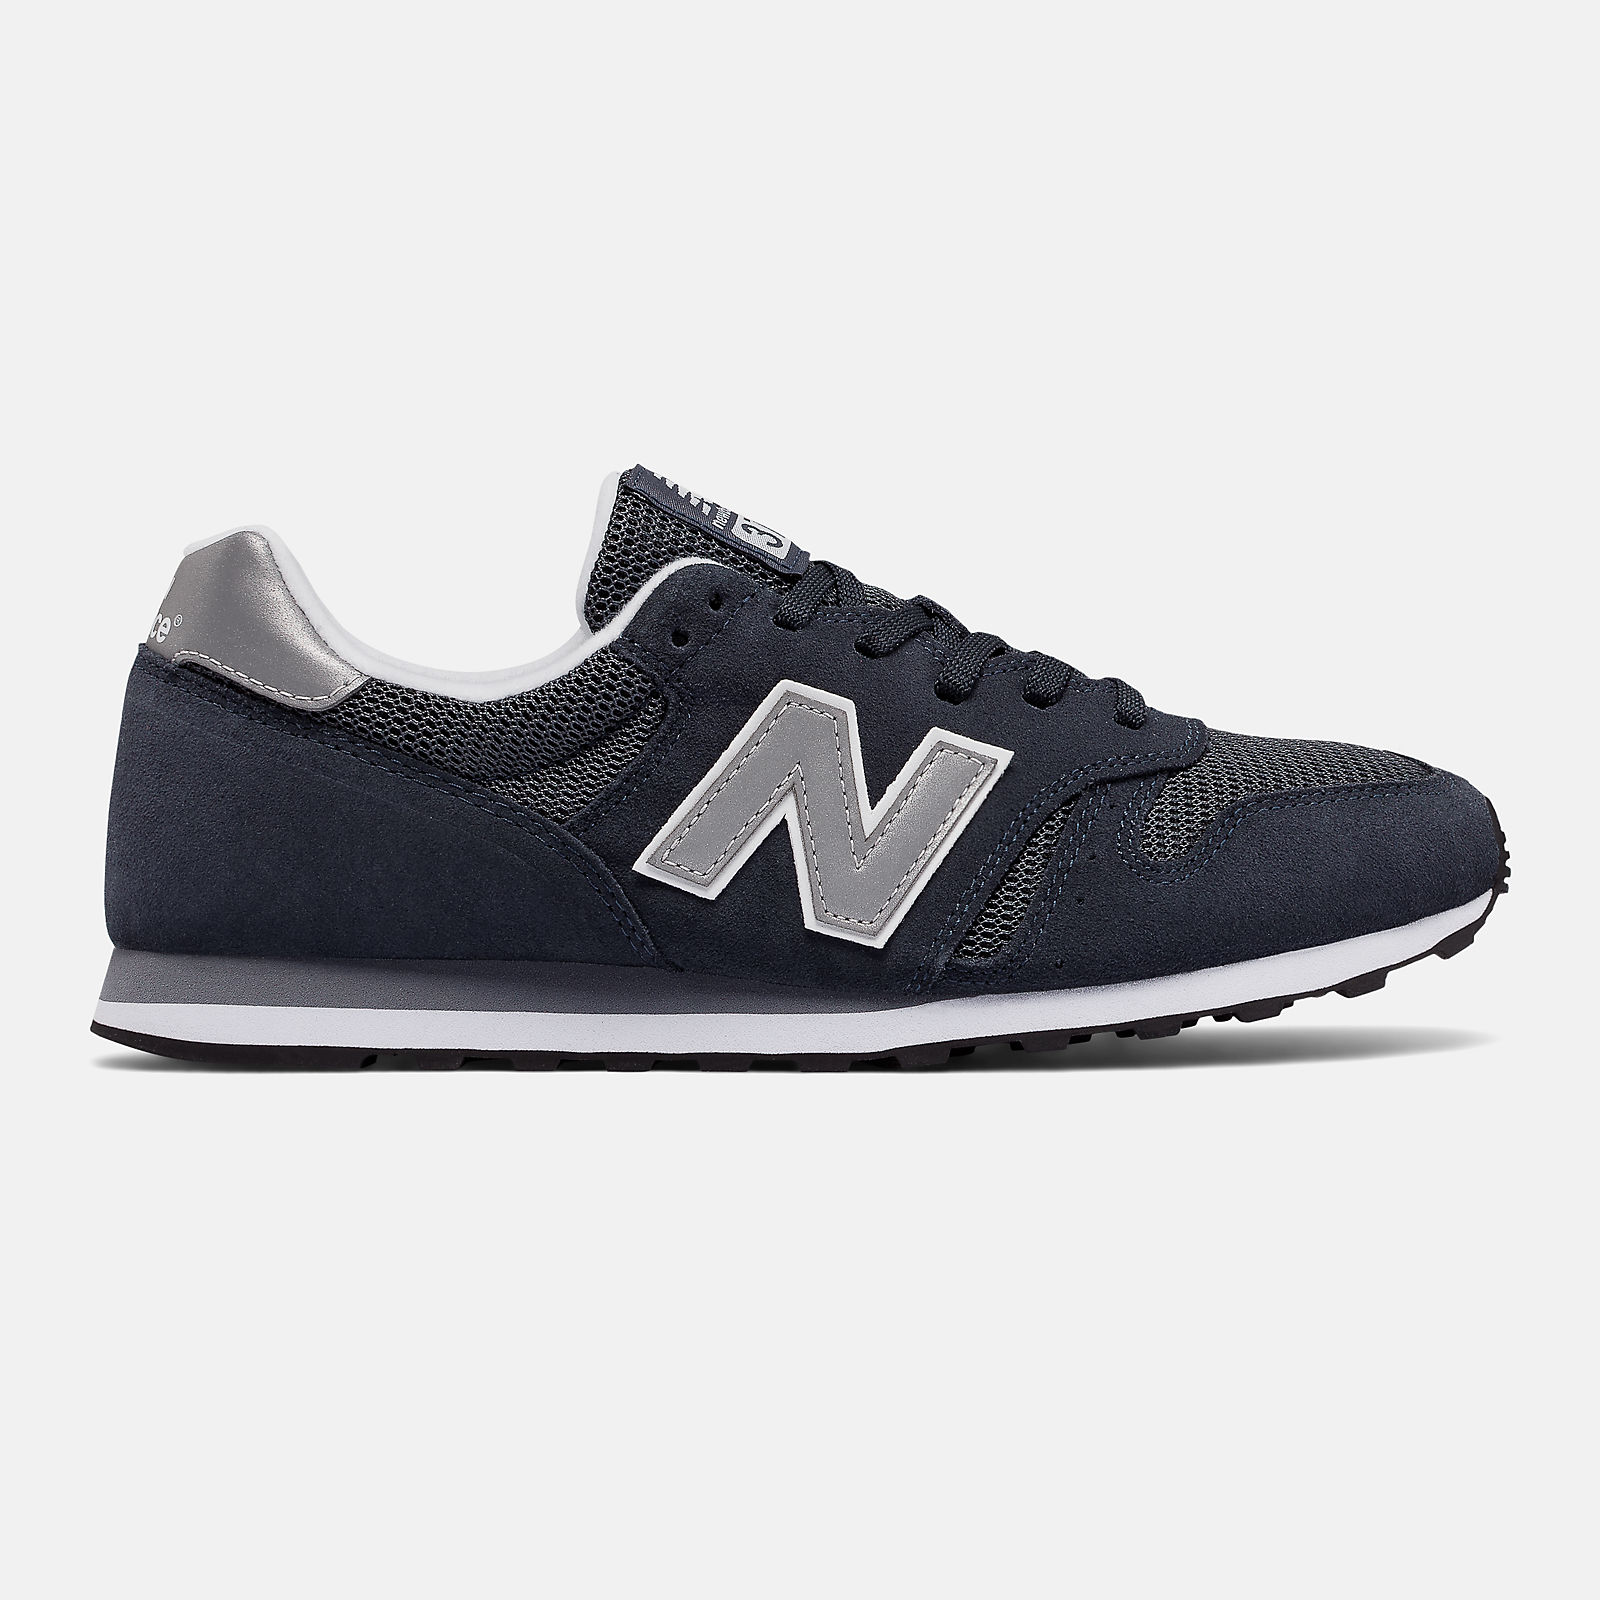 new balance sneakers 373 factory store 5f0c1 f73dc